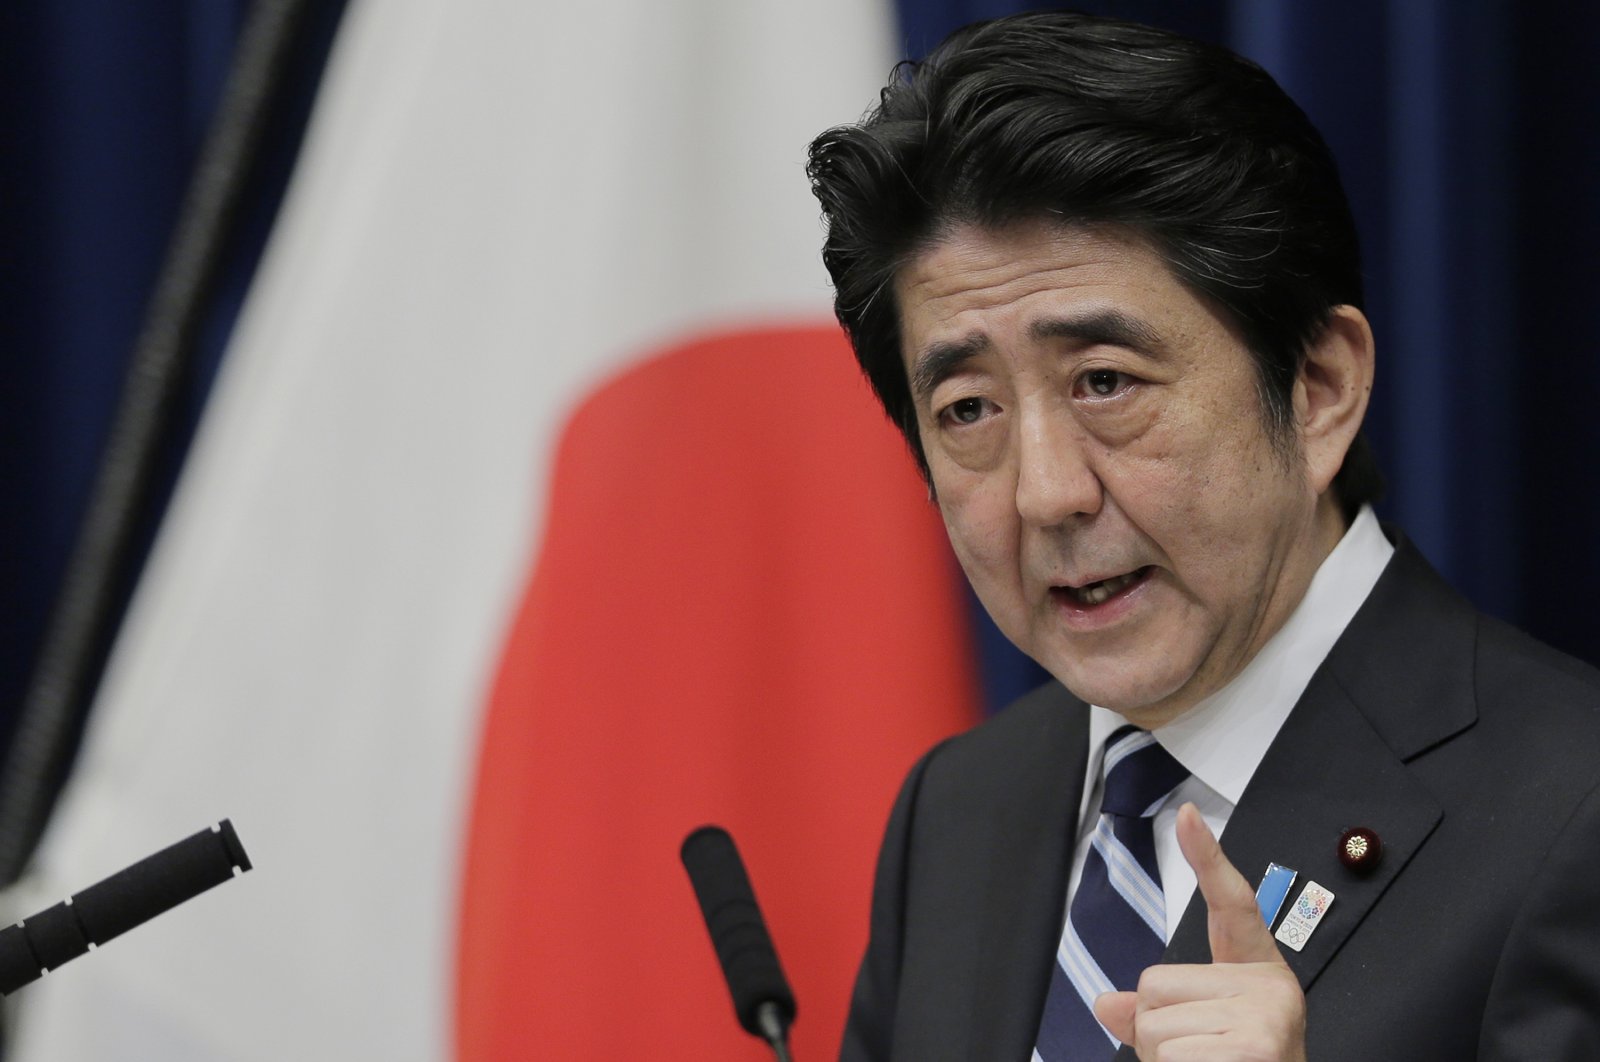 FILE - Then Japanese Prime Minister Shinzo Abe speaks during a news conference on Trans-Pacific Partnership or TPP at his official residence in Tokyo, Friday, March 15, 2013. Former Japanese Prime Minister Abe, a divisive arch-conservative and one of his nation's most powerful and influential figures, has died after being shot during a campaign speech Friday, July 8, 2022, in western Japan, hospital officials said. (AP Photo/Itsuo Inouye, File)